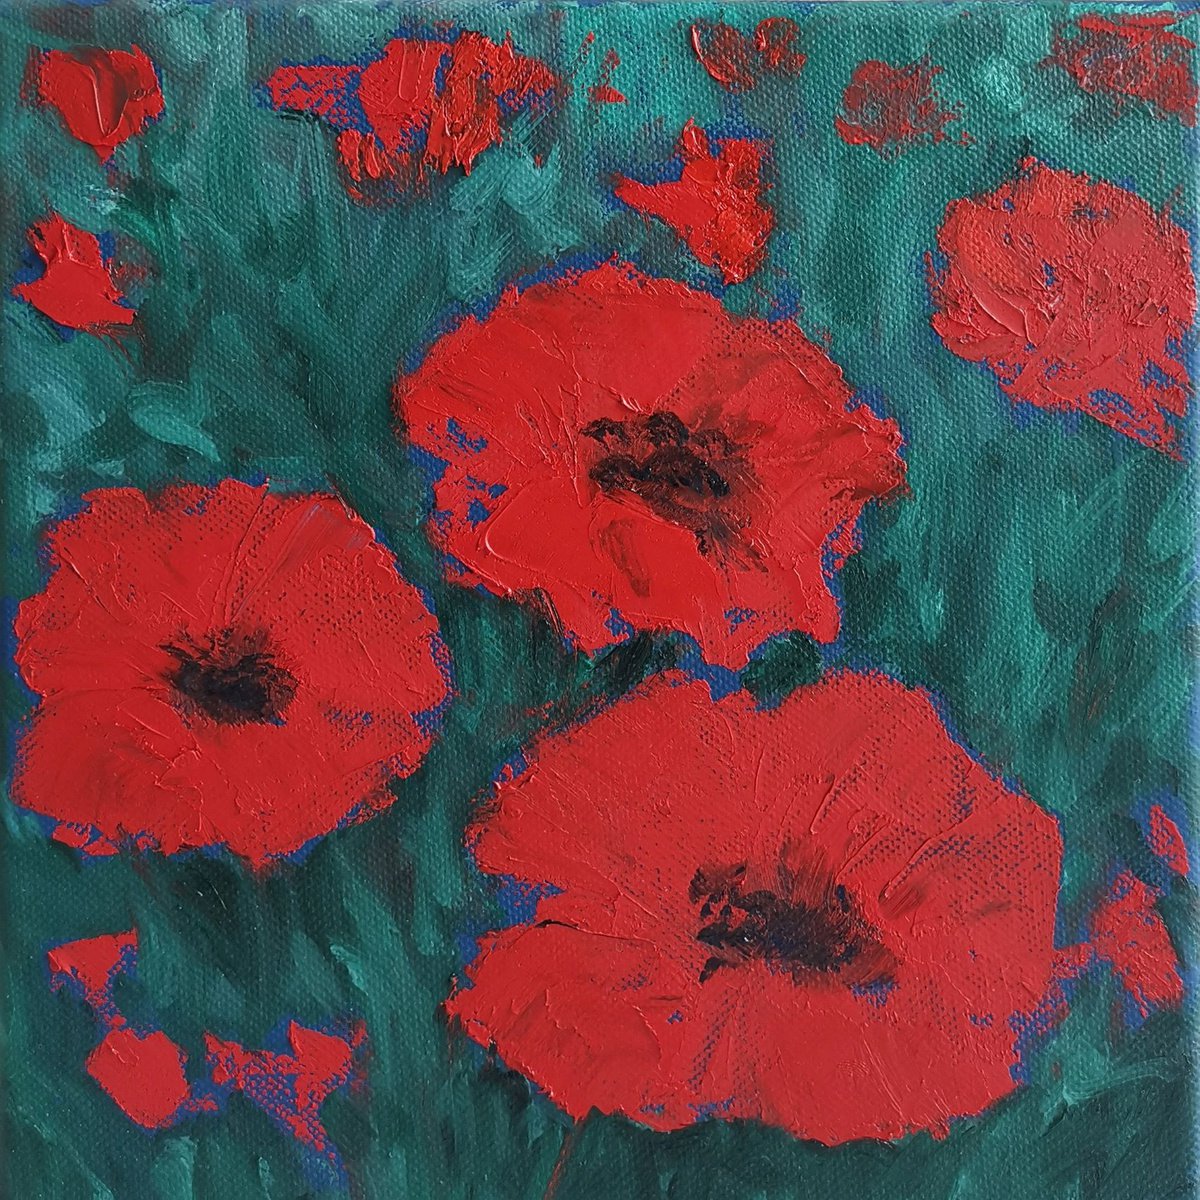 Red poppies by Elena Mosurak